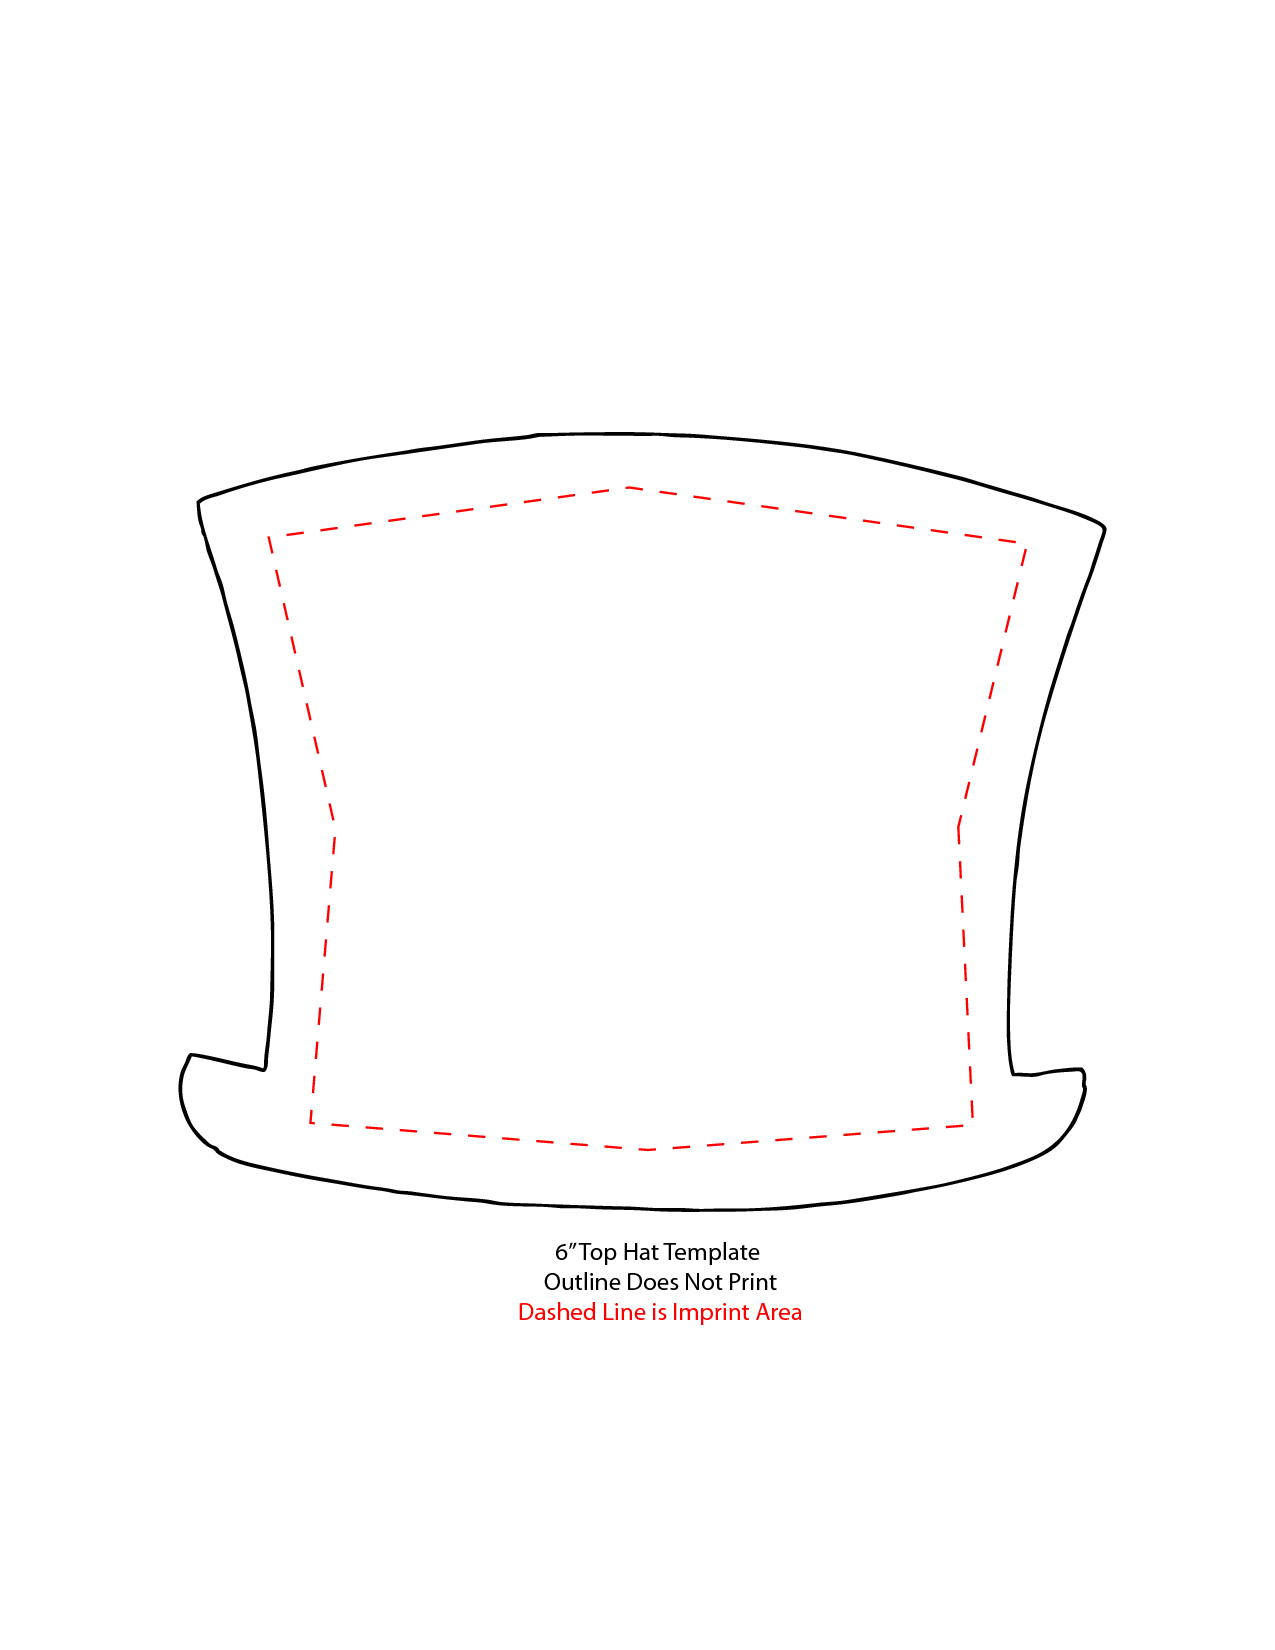 7 Best Images of Top Hat Template Printable Snowman Top Hat Templates